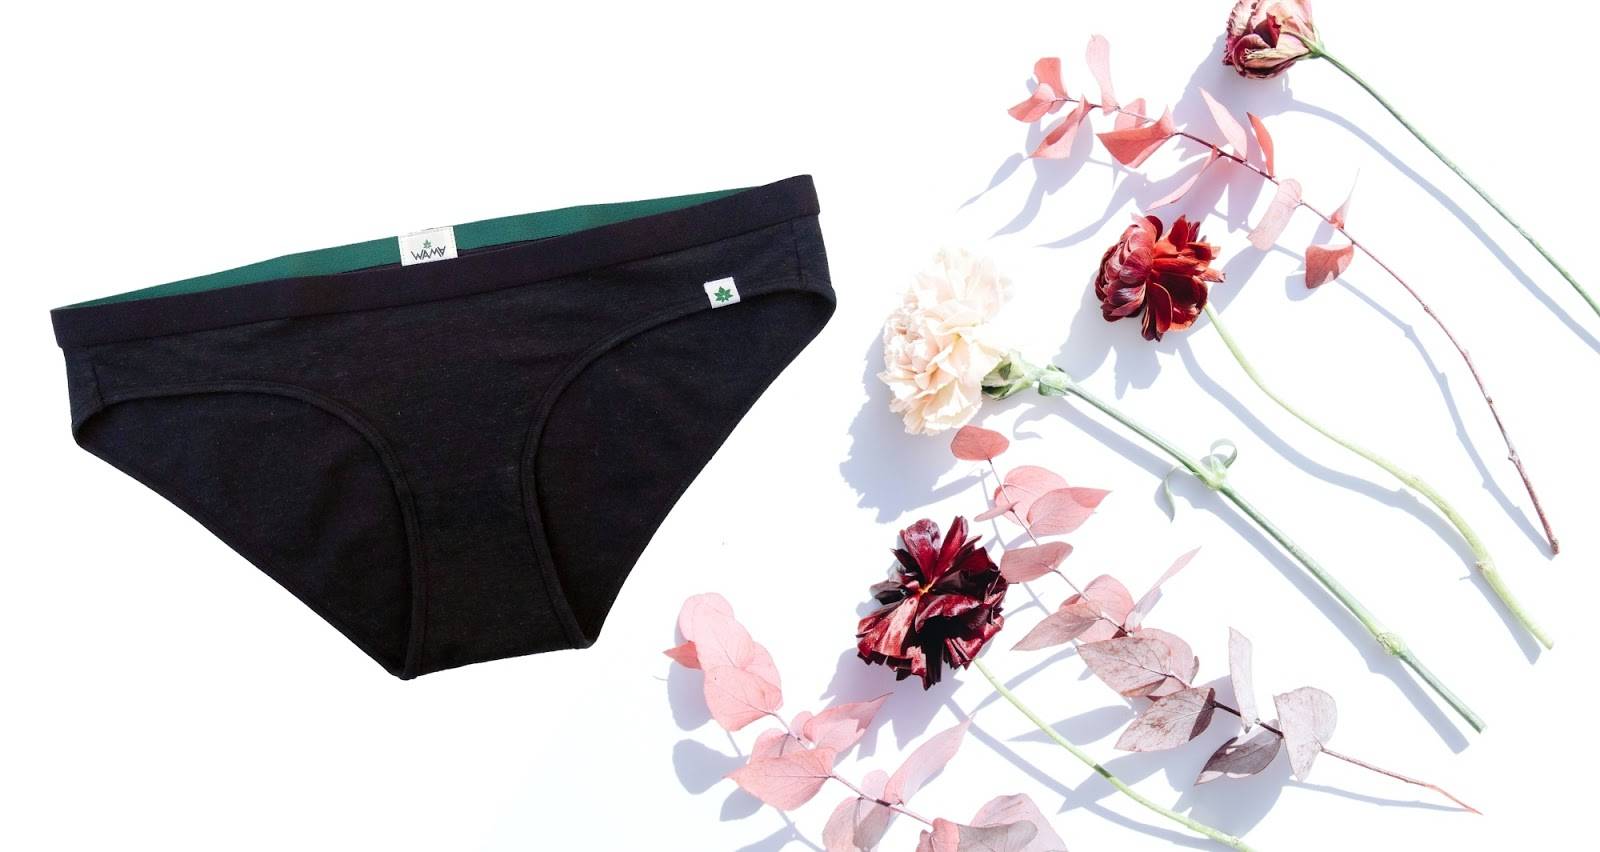 Wama Underwear and Red flowers representing how to get blood out of underwear